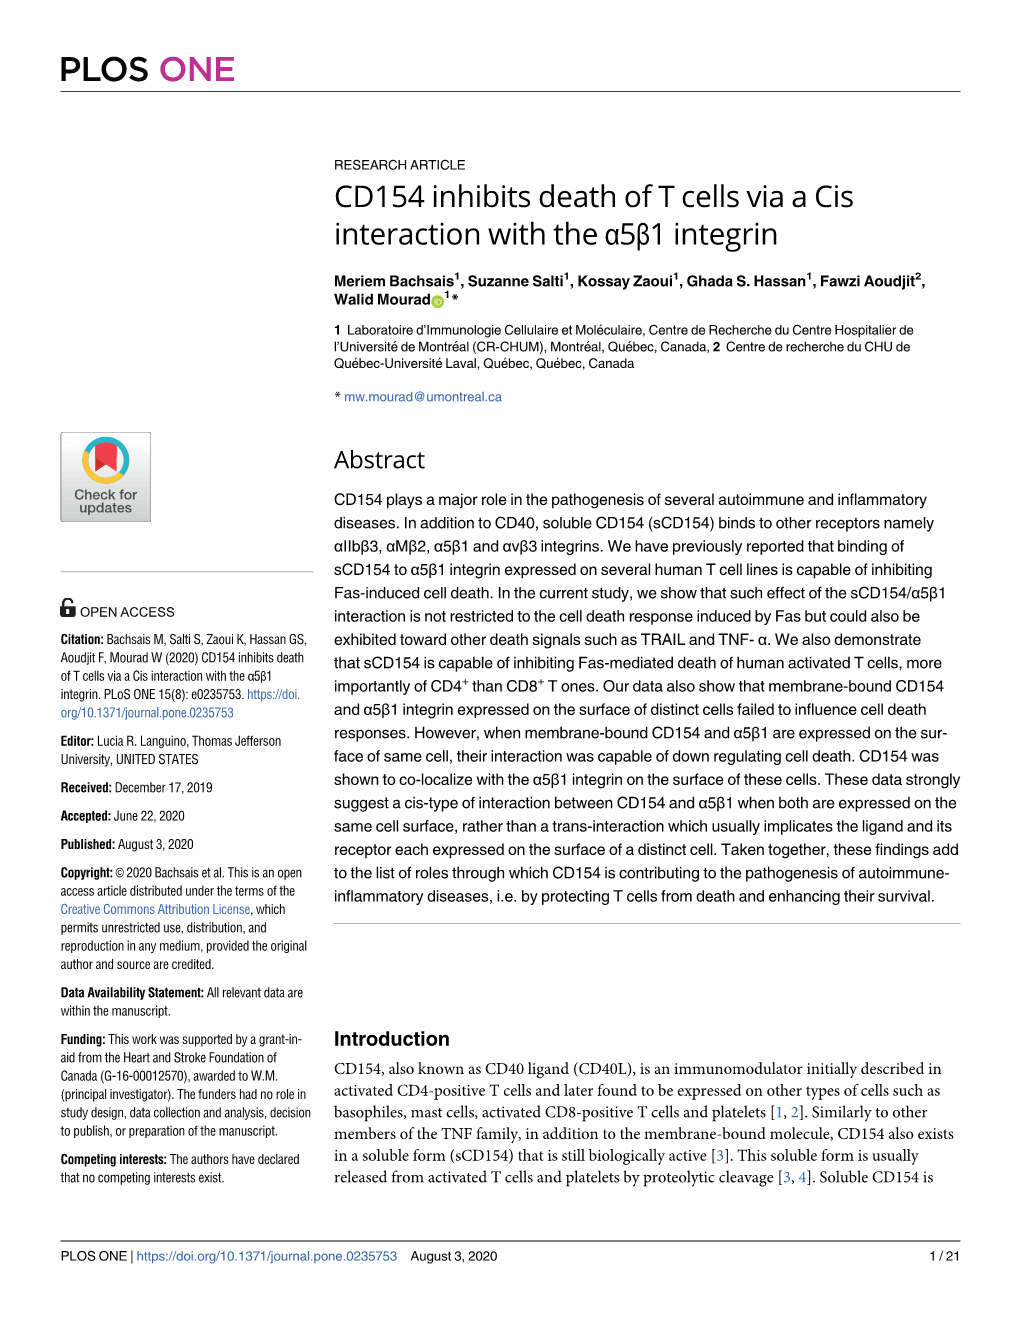 CD154 Inhibits Death of T Cells Via a Cis Interaction with the Α5β1 Integrin